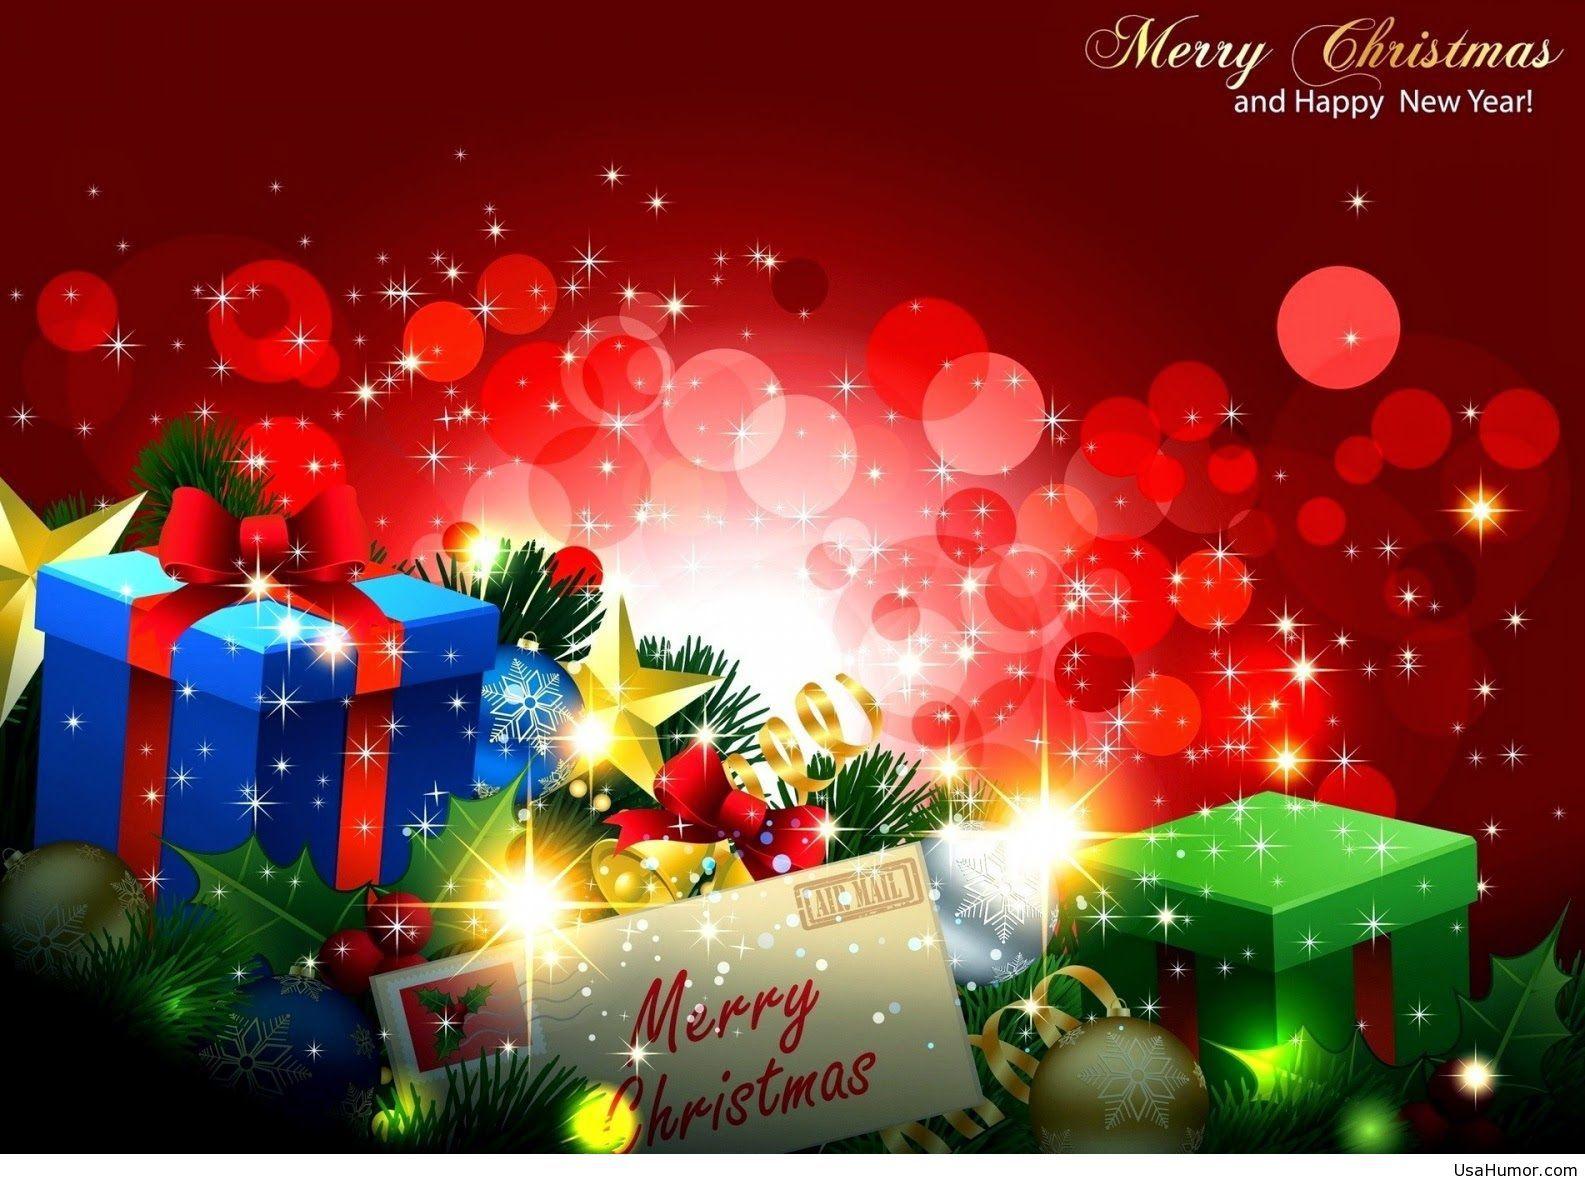 Merry Christmas wallpaper and Happy new year free download